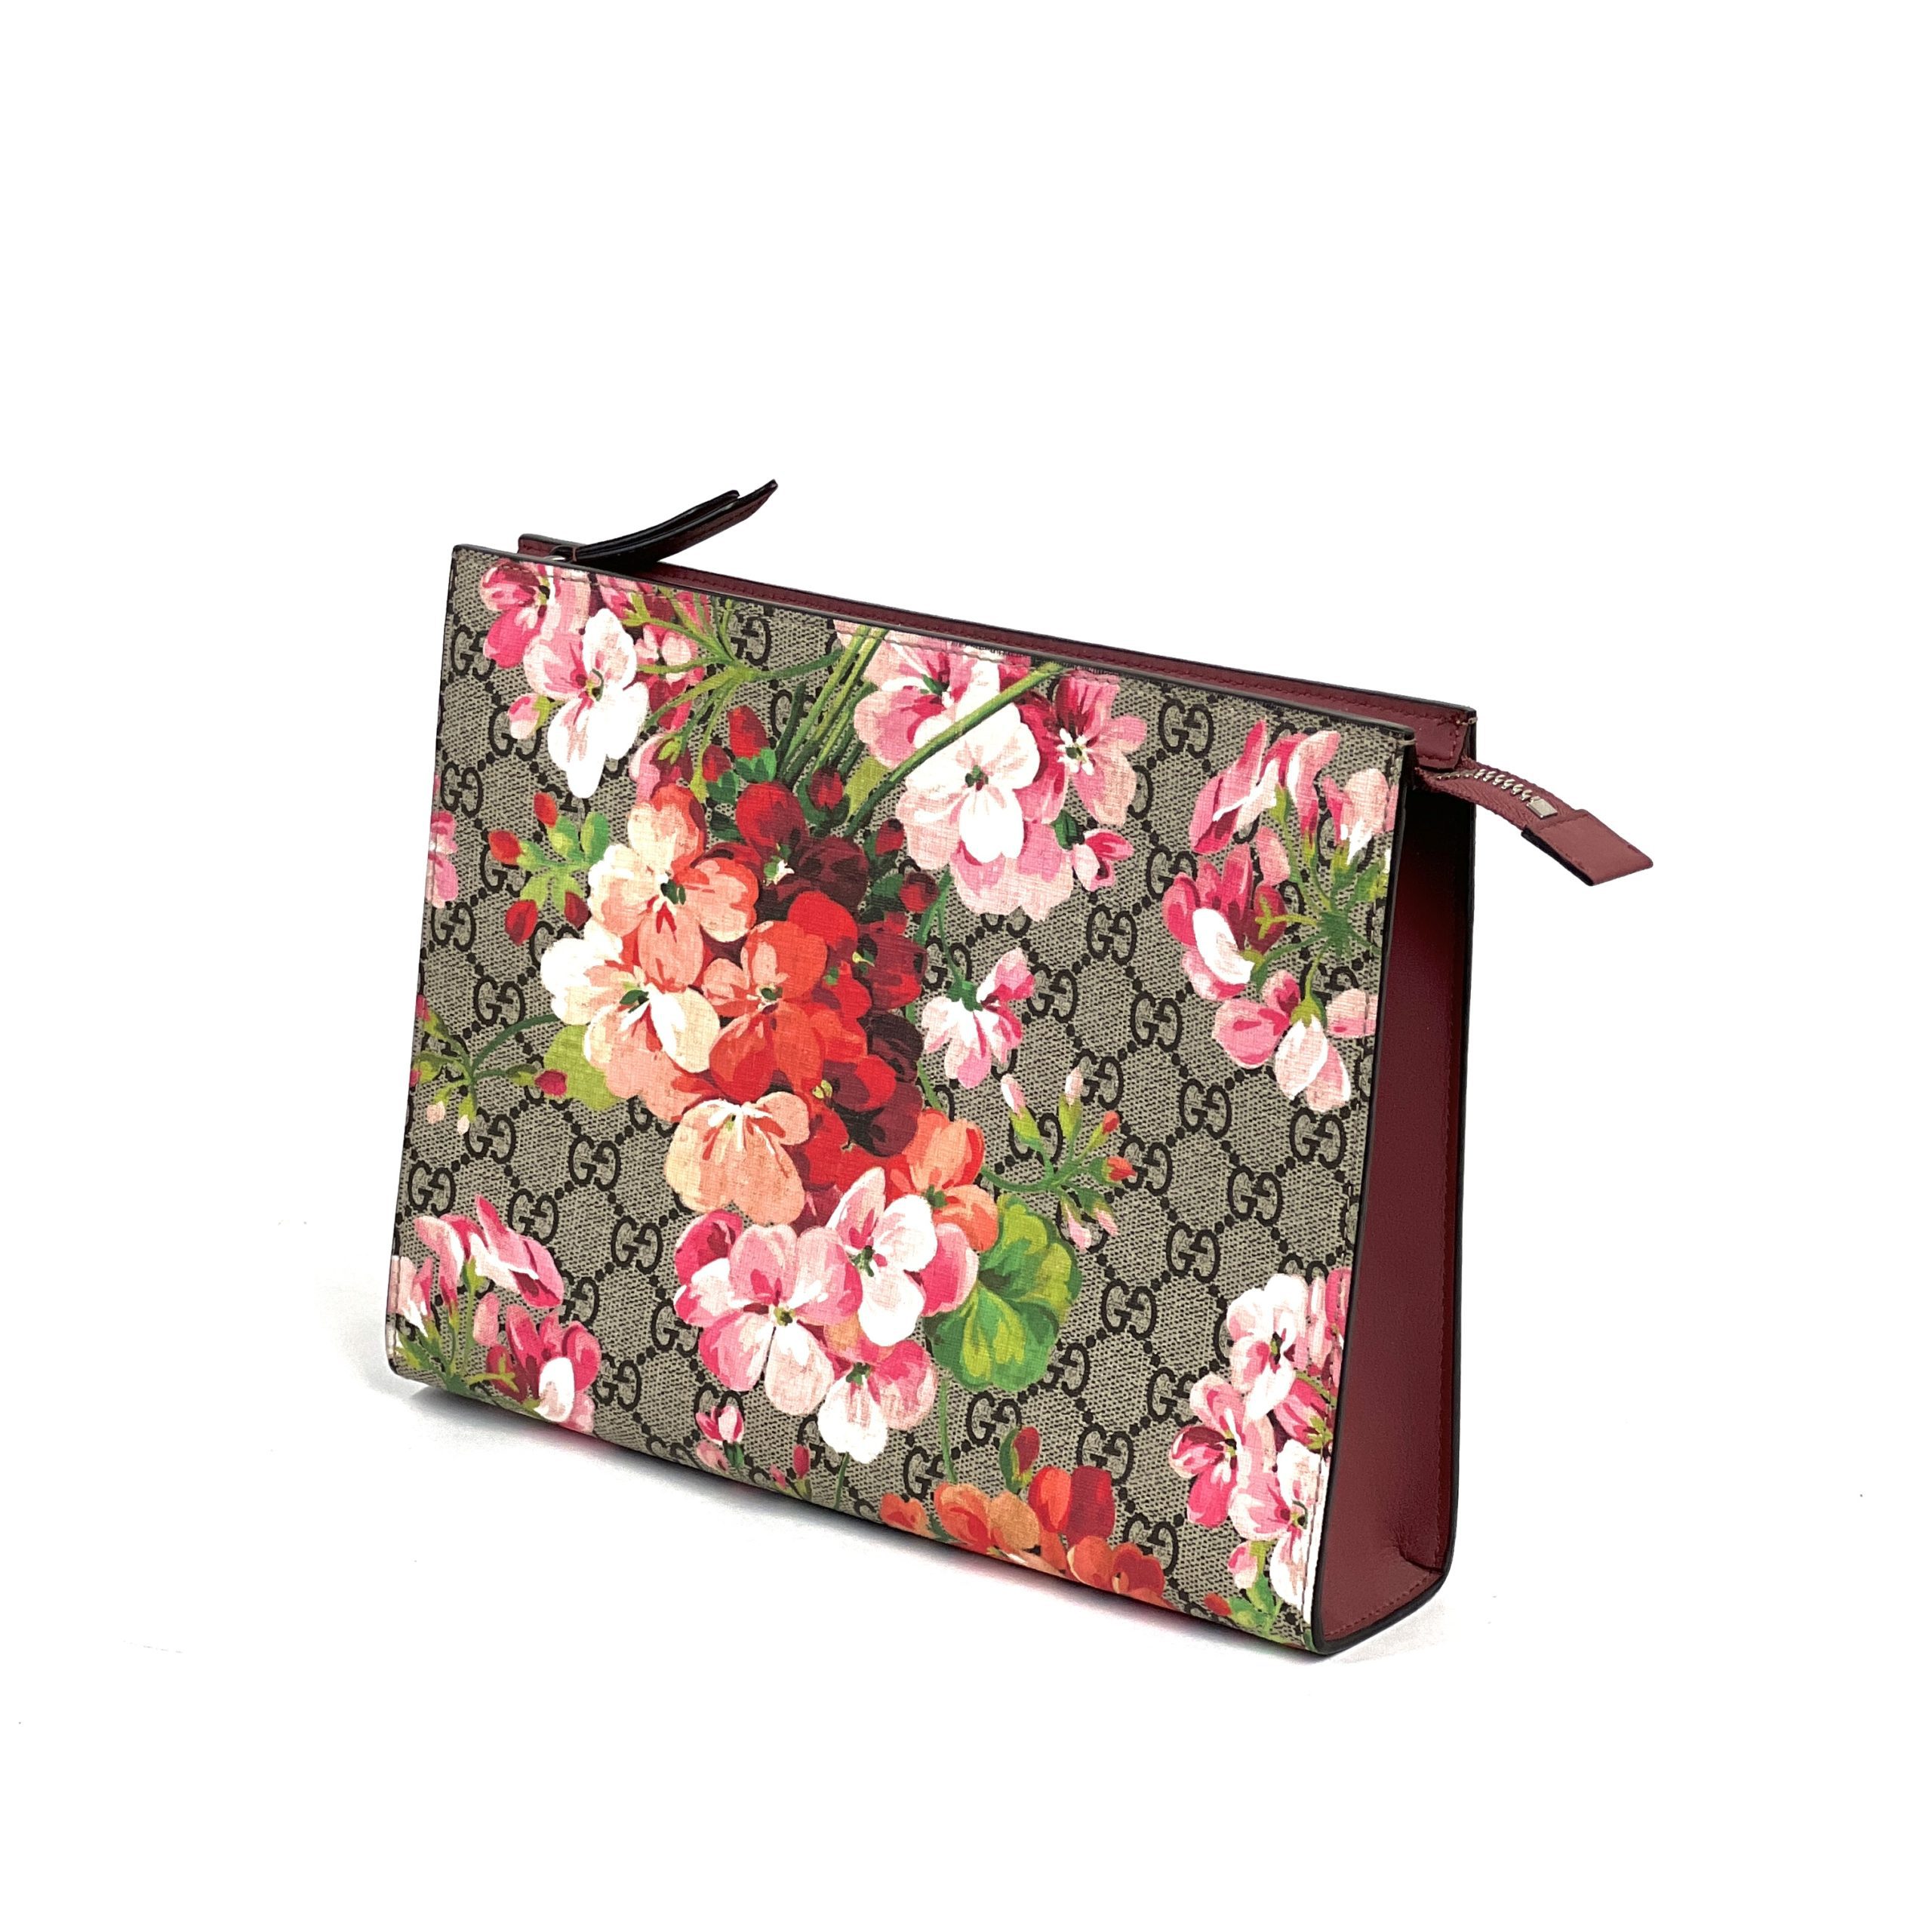 Gucci Pre-loved Gg Blooms Clutch Bag